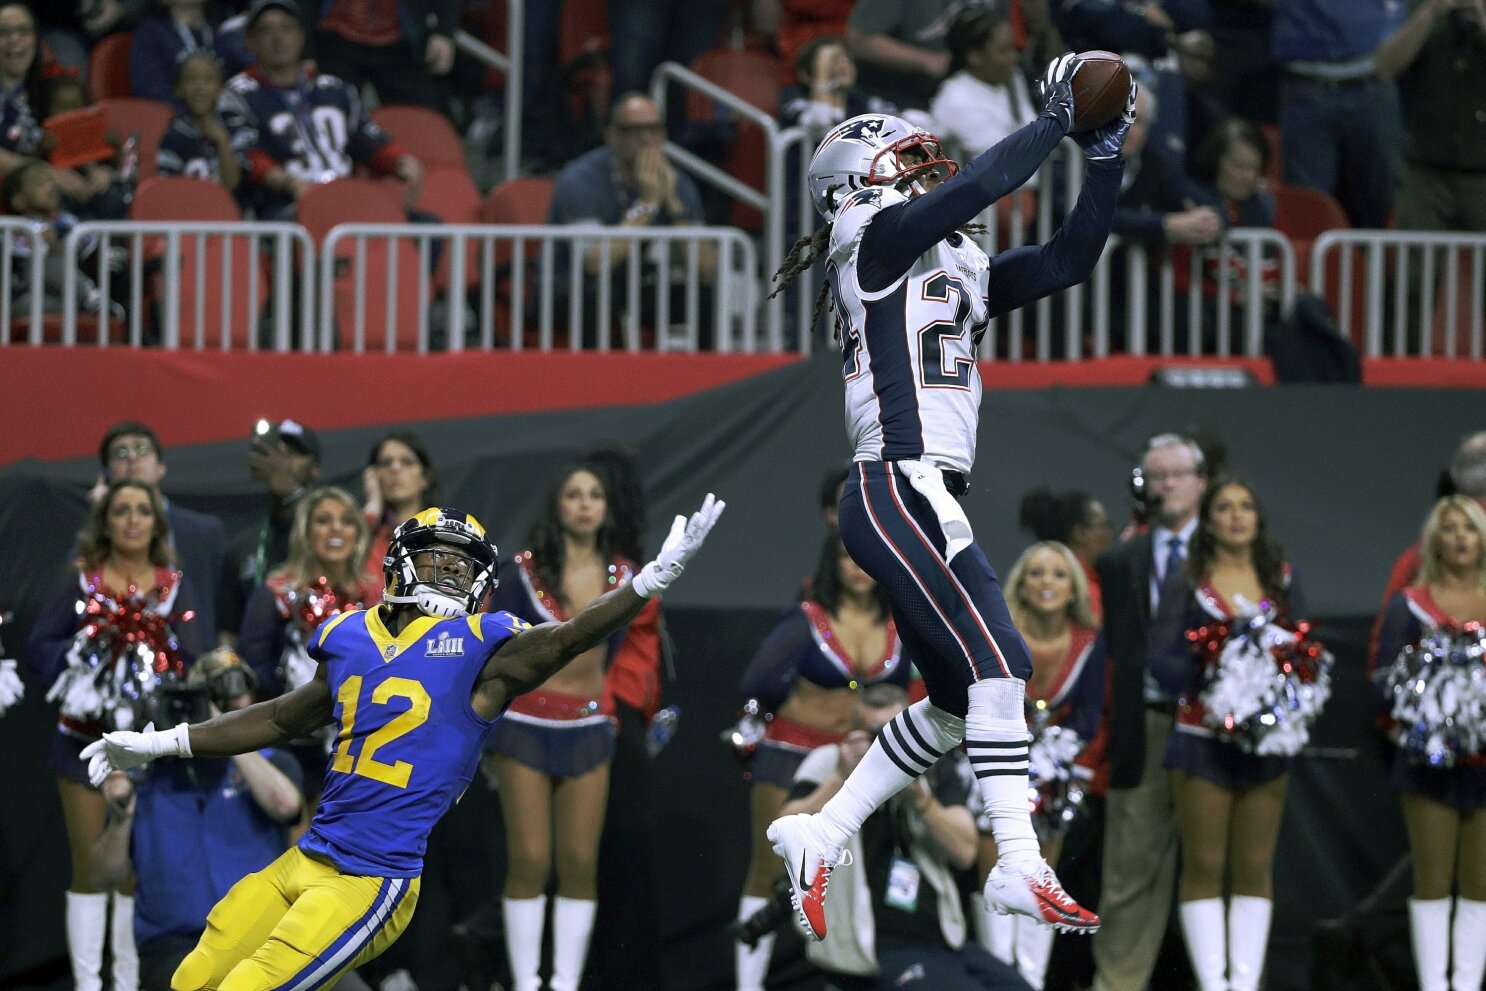 Super Bowl 2015: Internet reacts to New England Patriots' win - Sports  Illustrated